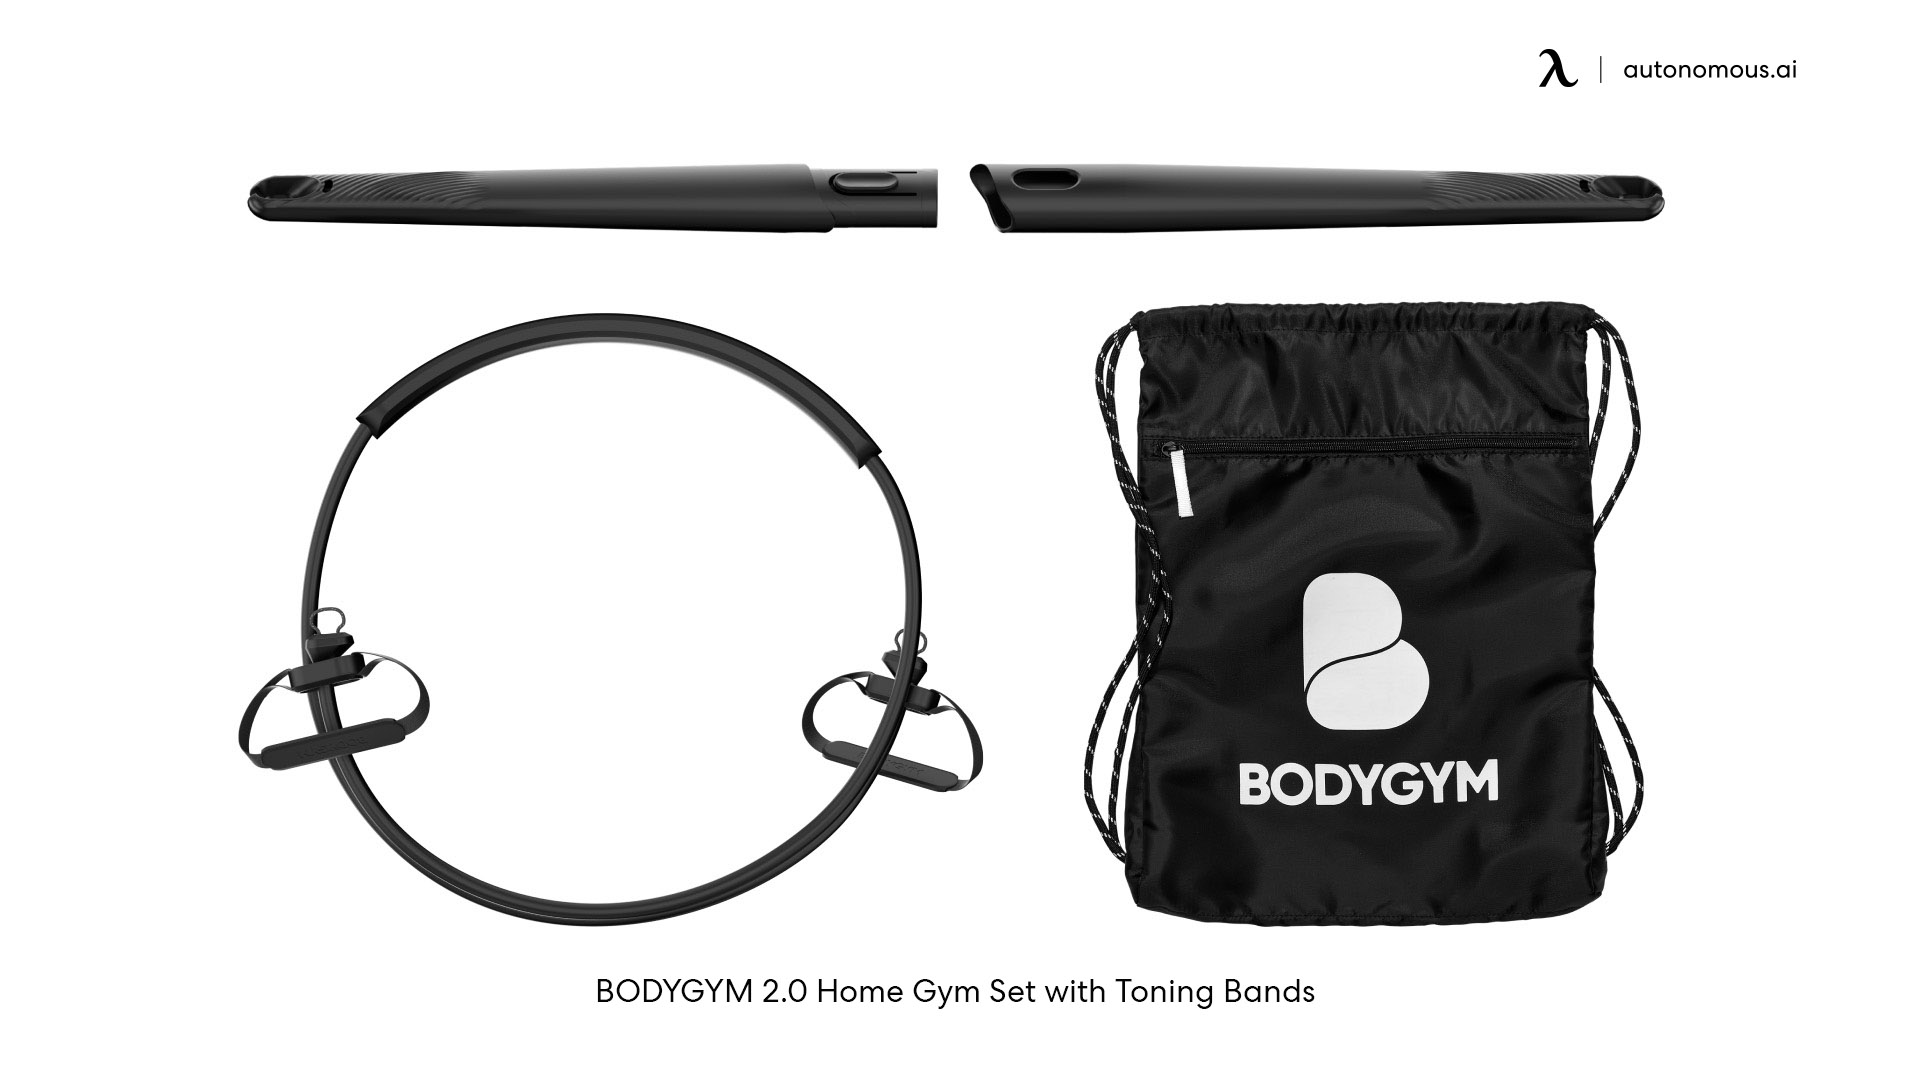 BODYGYM 2.0 Home Gym Set with Toning Bands